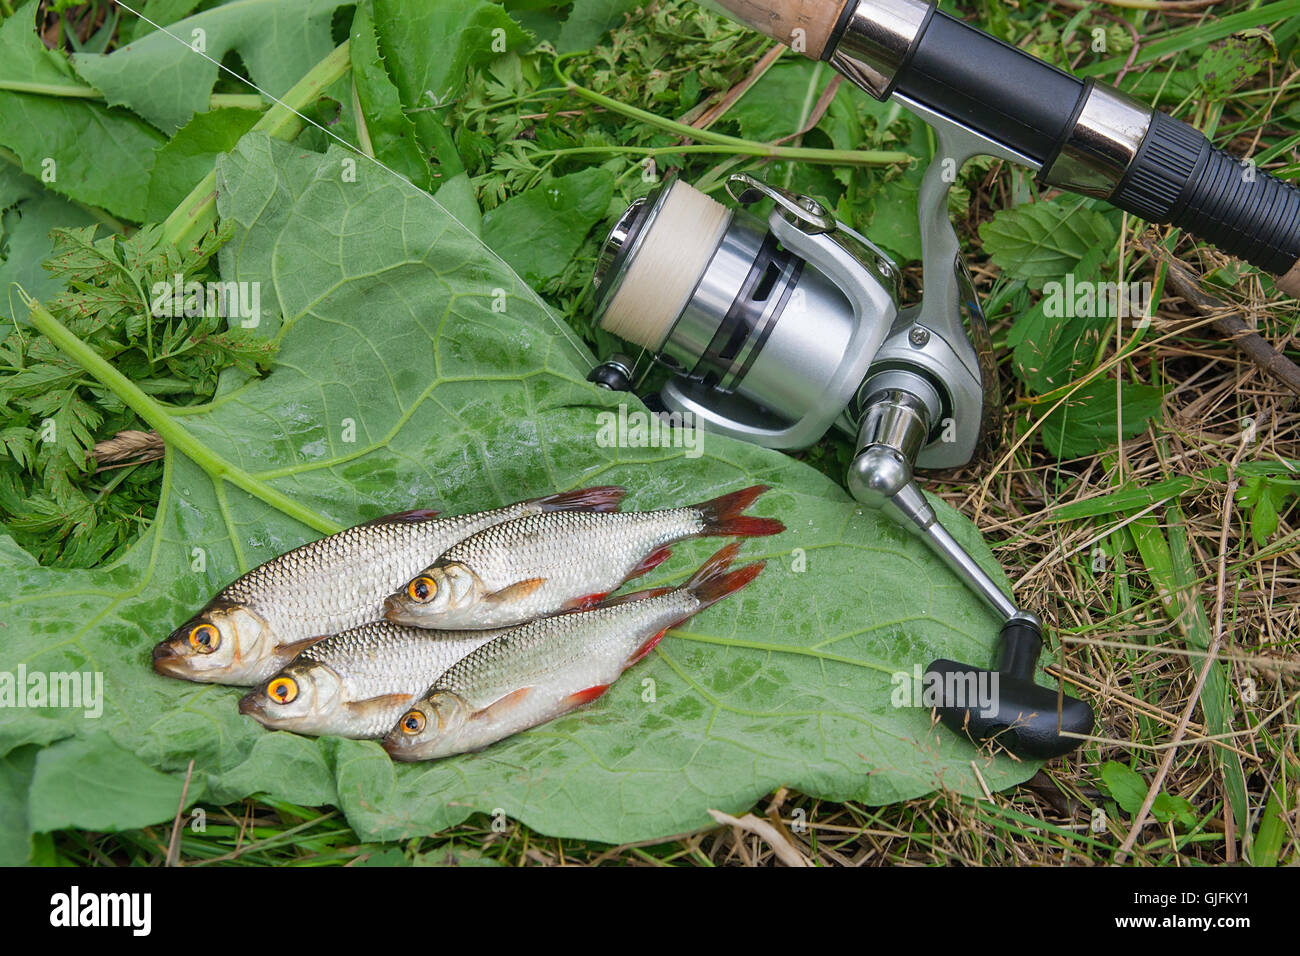 https://c8.alamy.com/comp/GJFKY1/freshwater-fish-just-taken-from-the-water-catching-freshwater-fish-GJFKY1.jpg